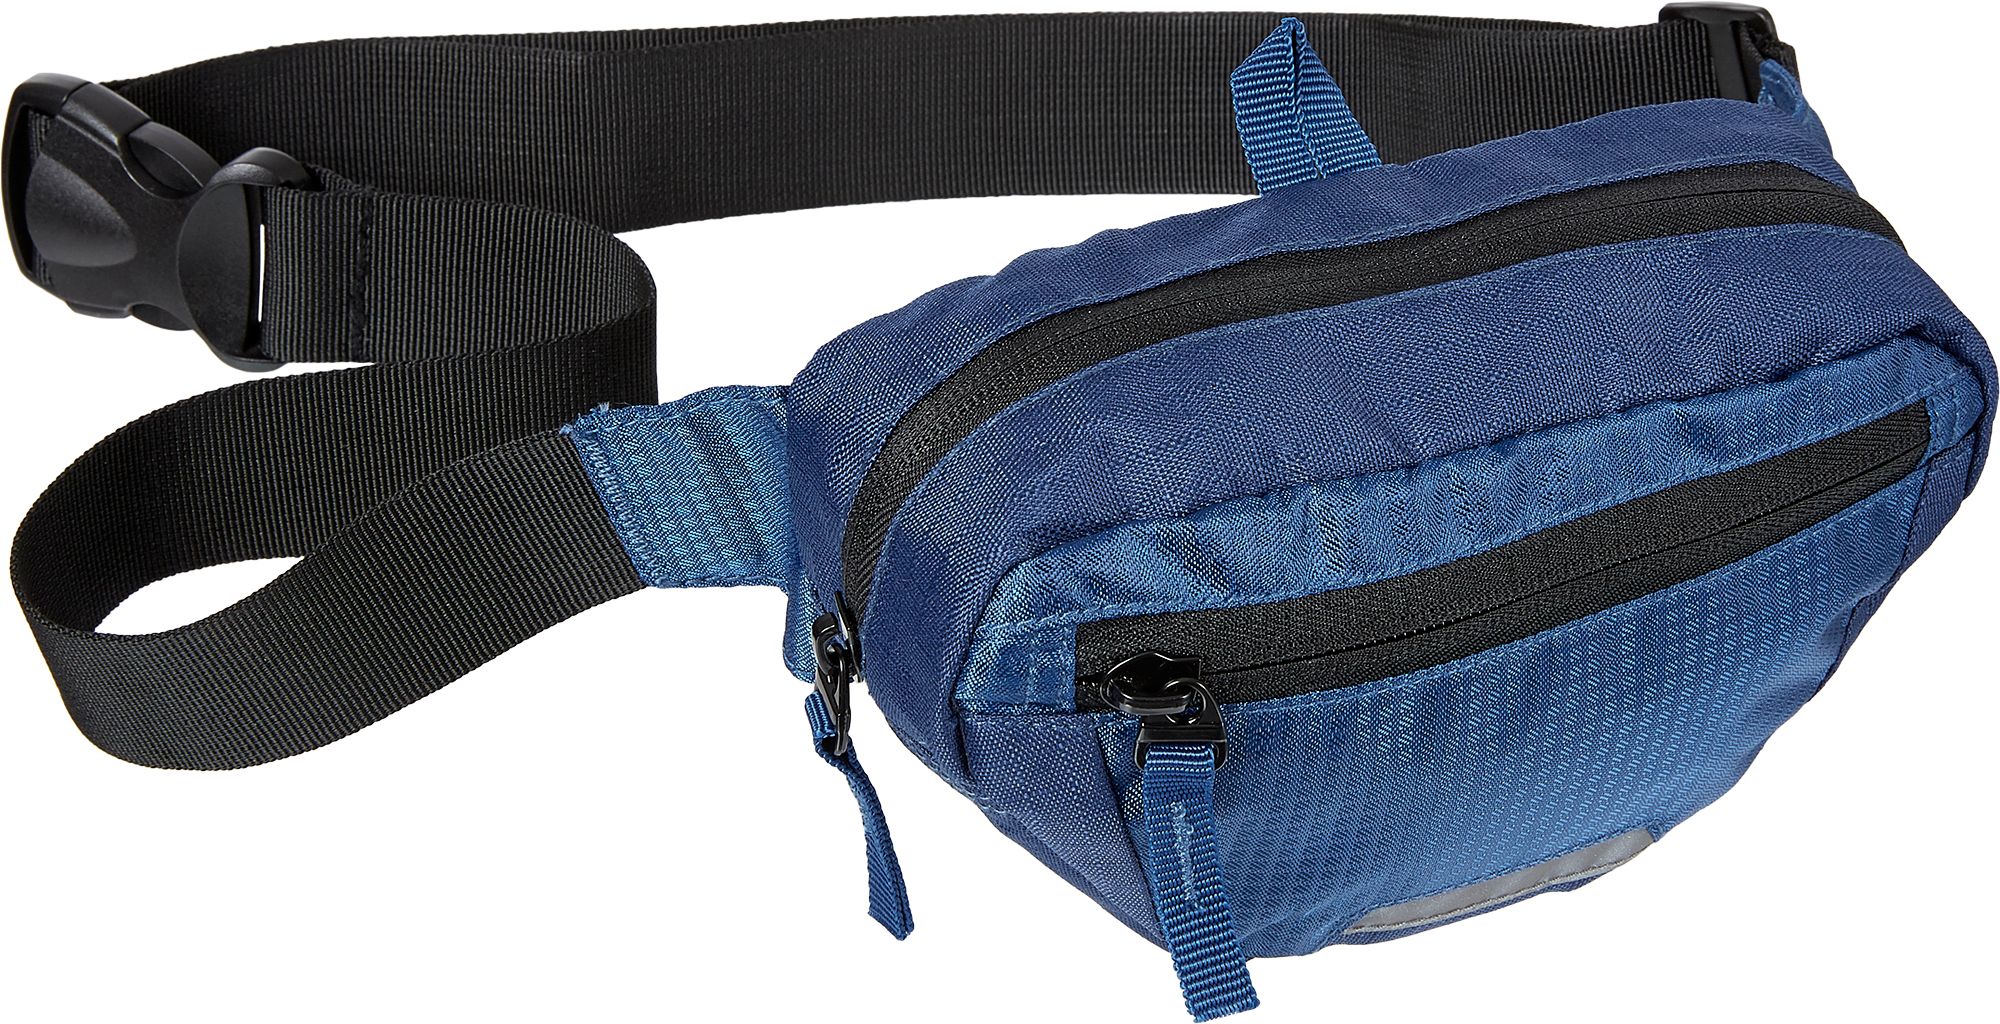 Hiking Backpacks, Hydration Packs & More | Best Price Guarantee at DICK'S